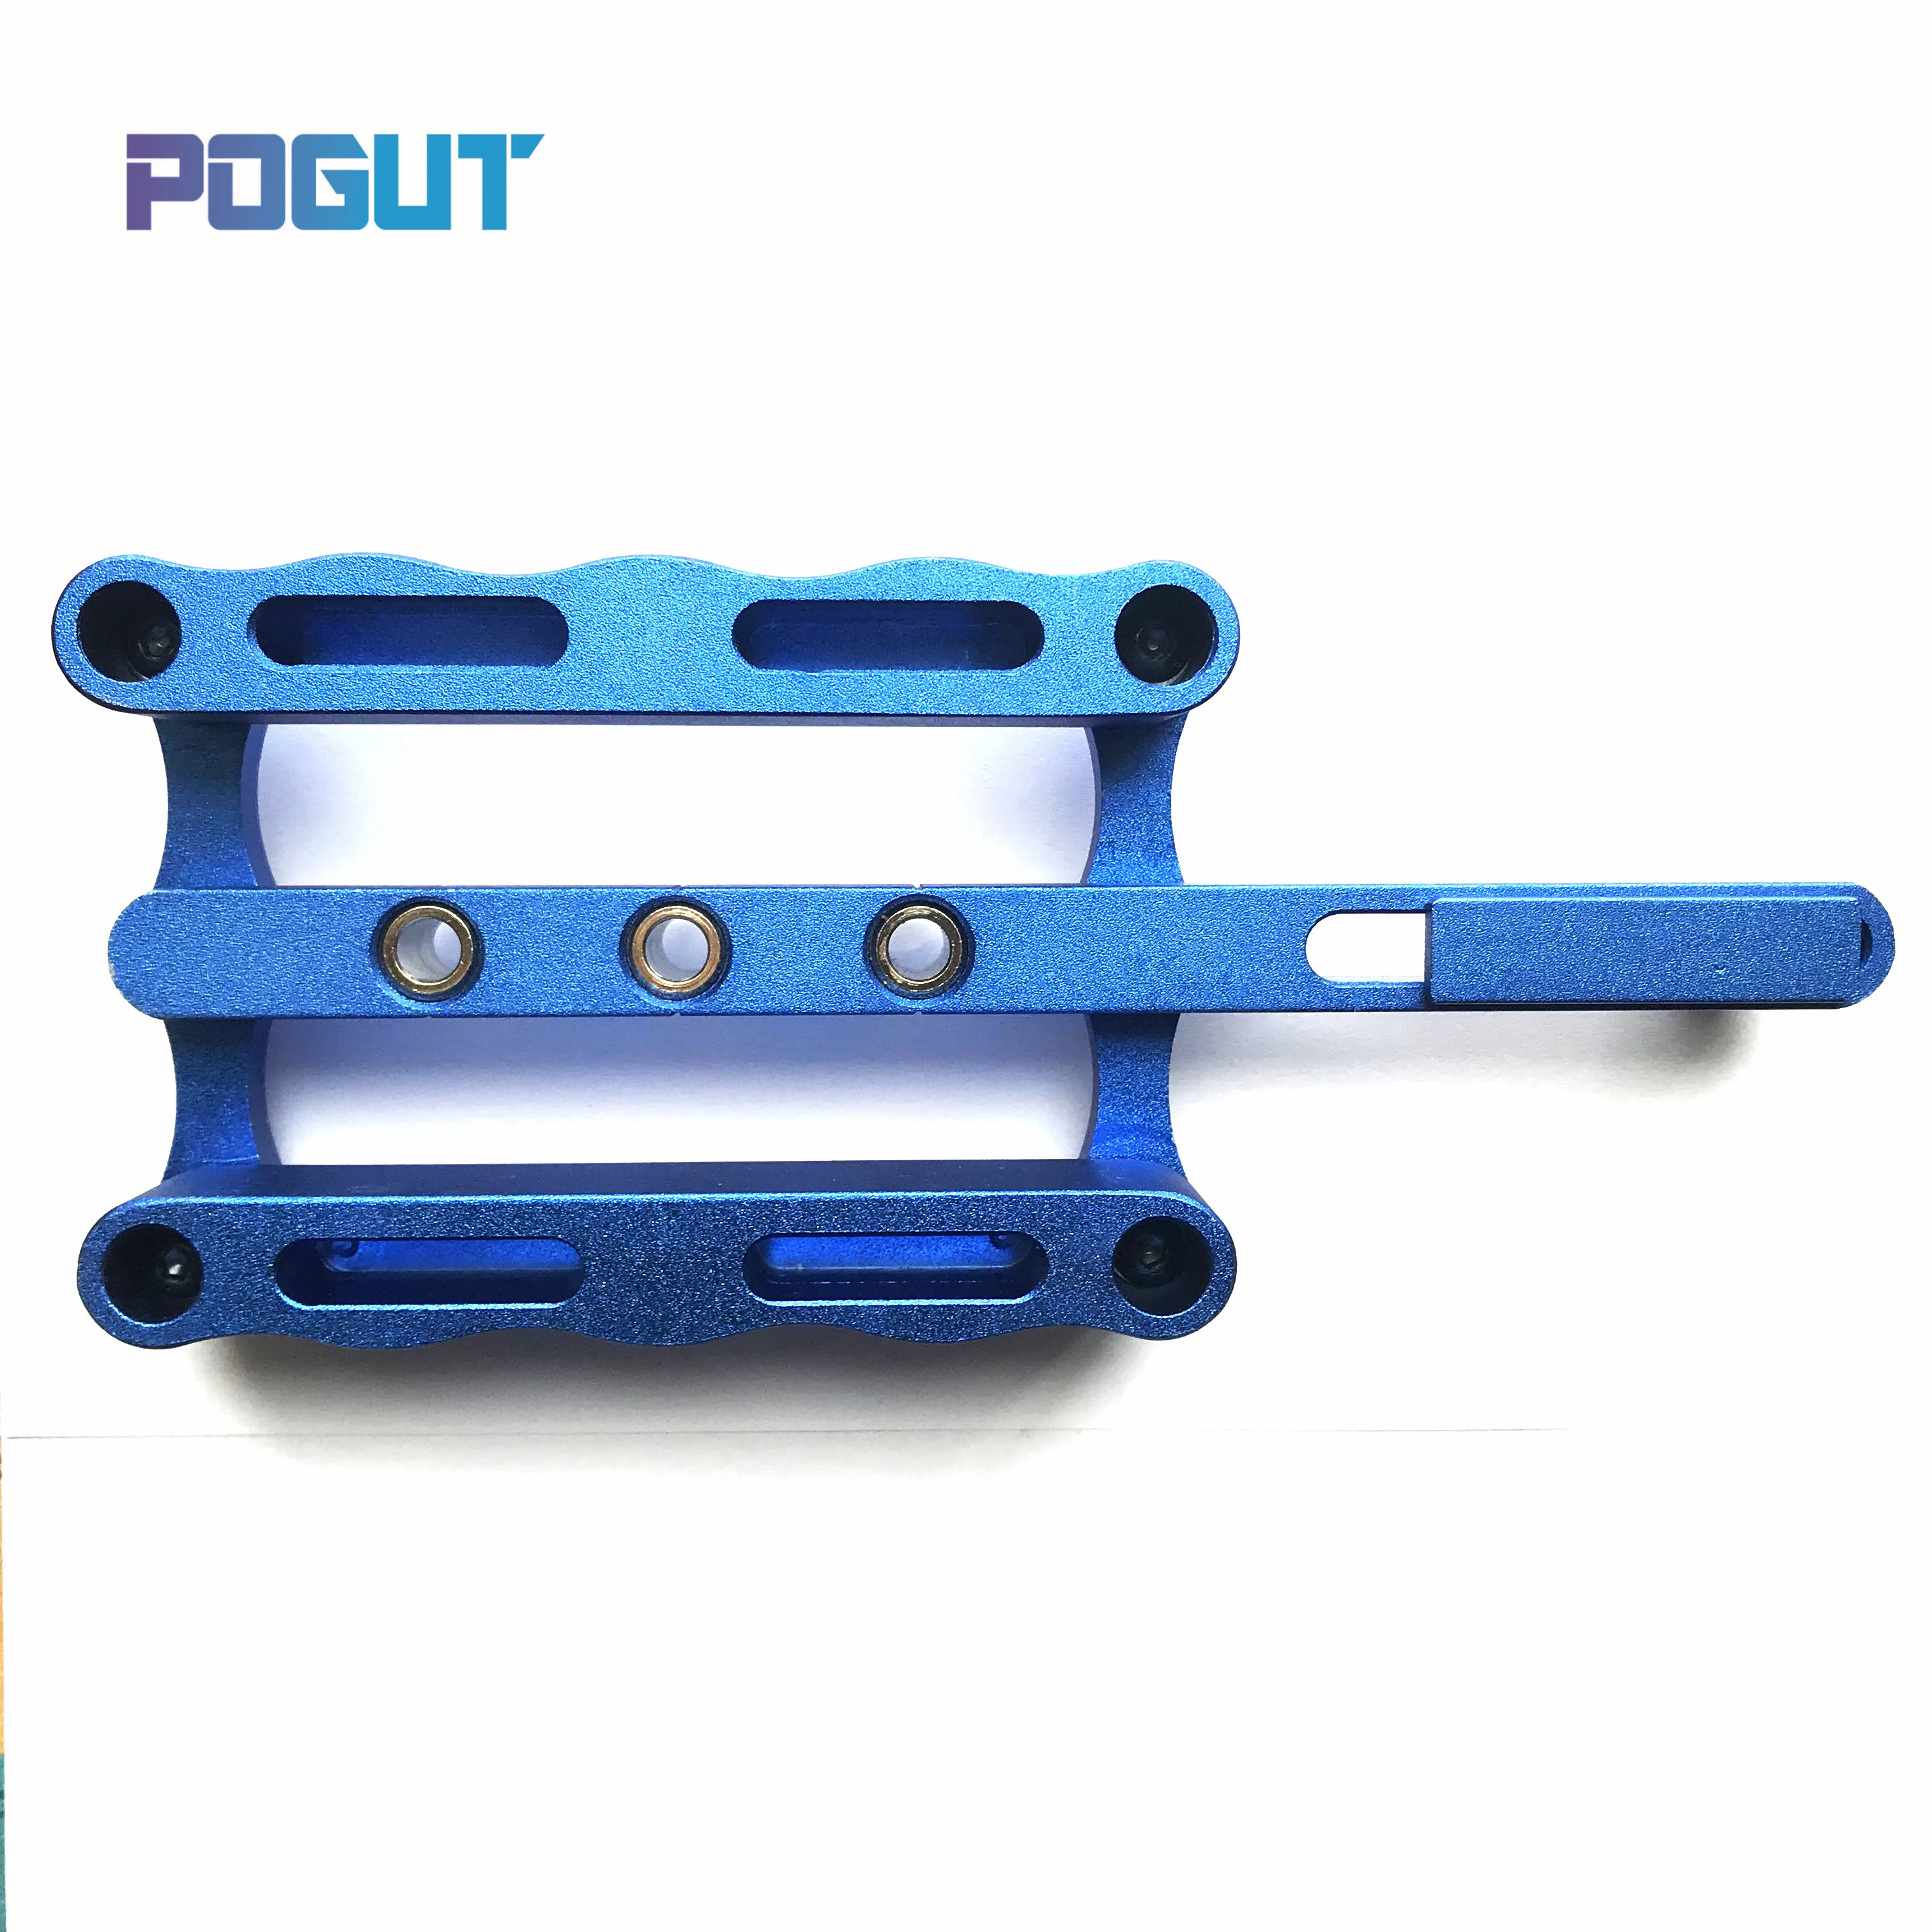 Self Centering Dowel Jig for Corner Edge Surface Joints Drilling Wood Clamp Tool 